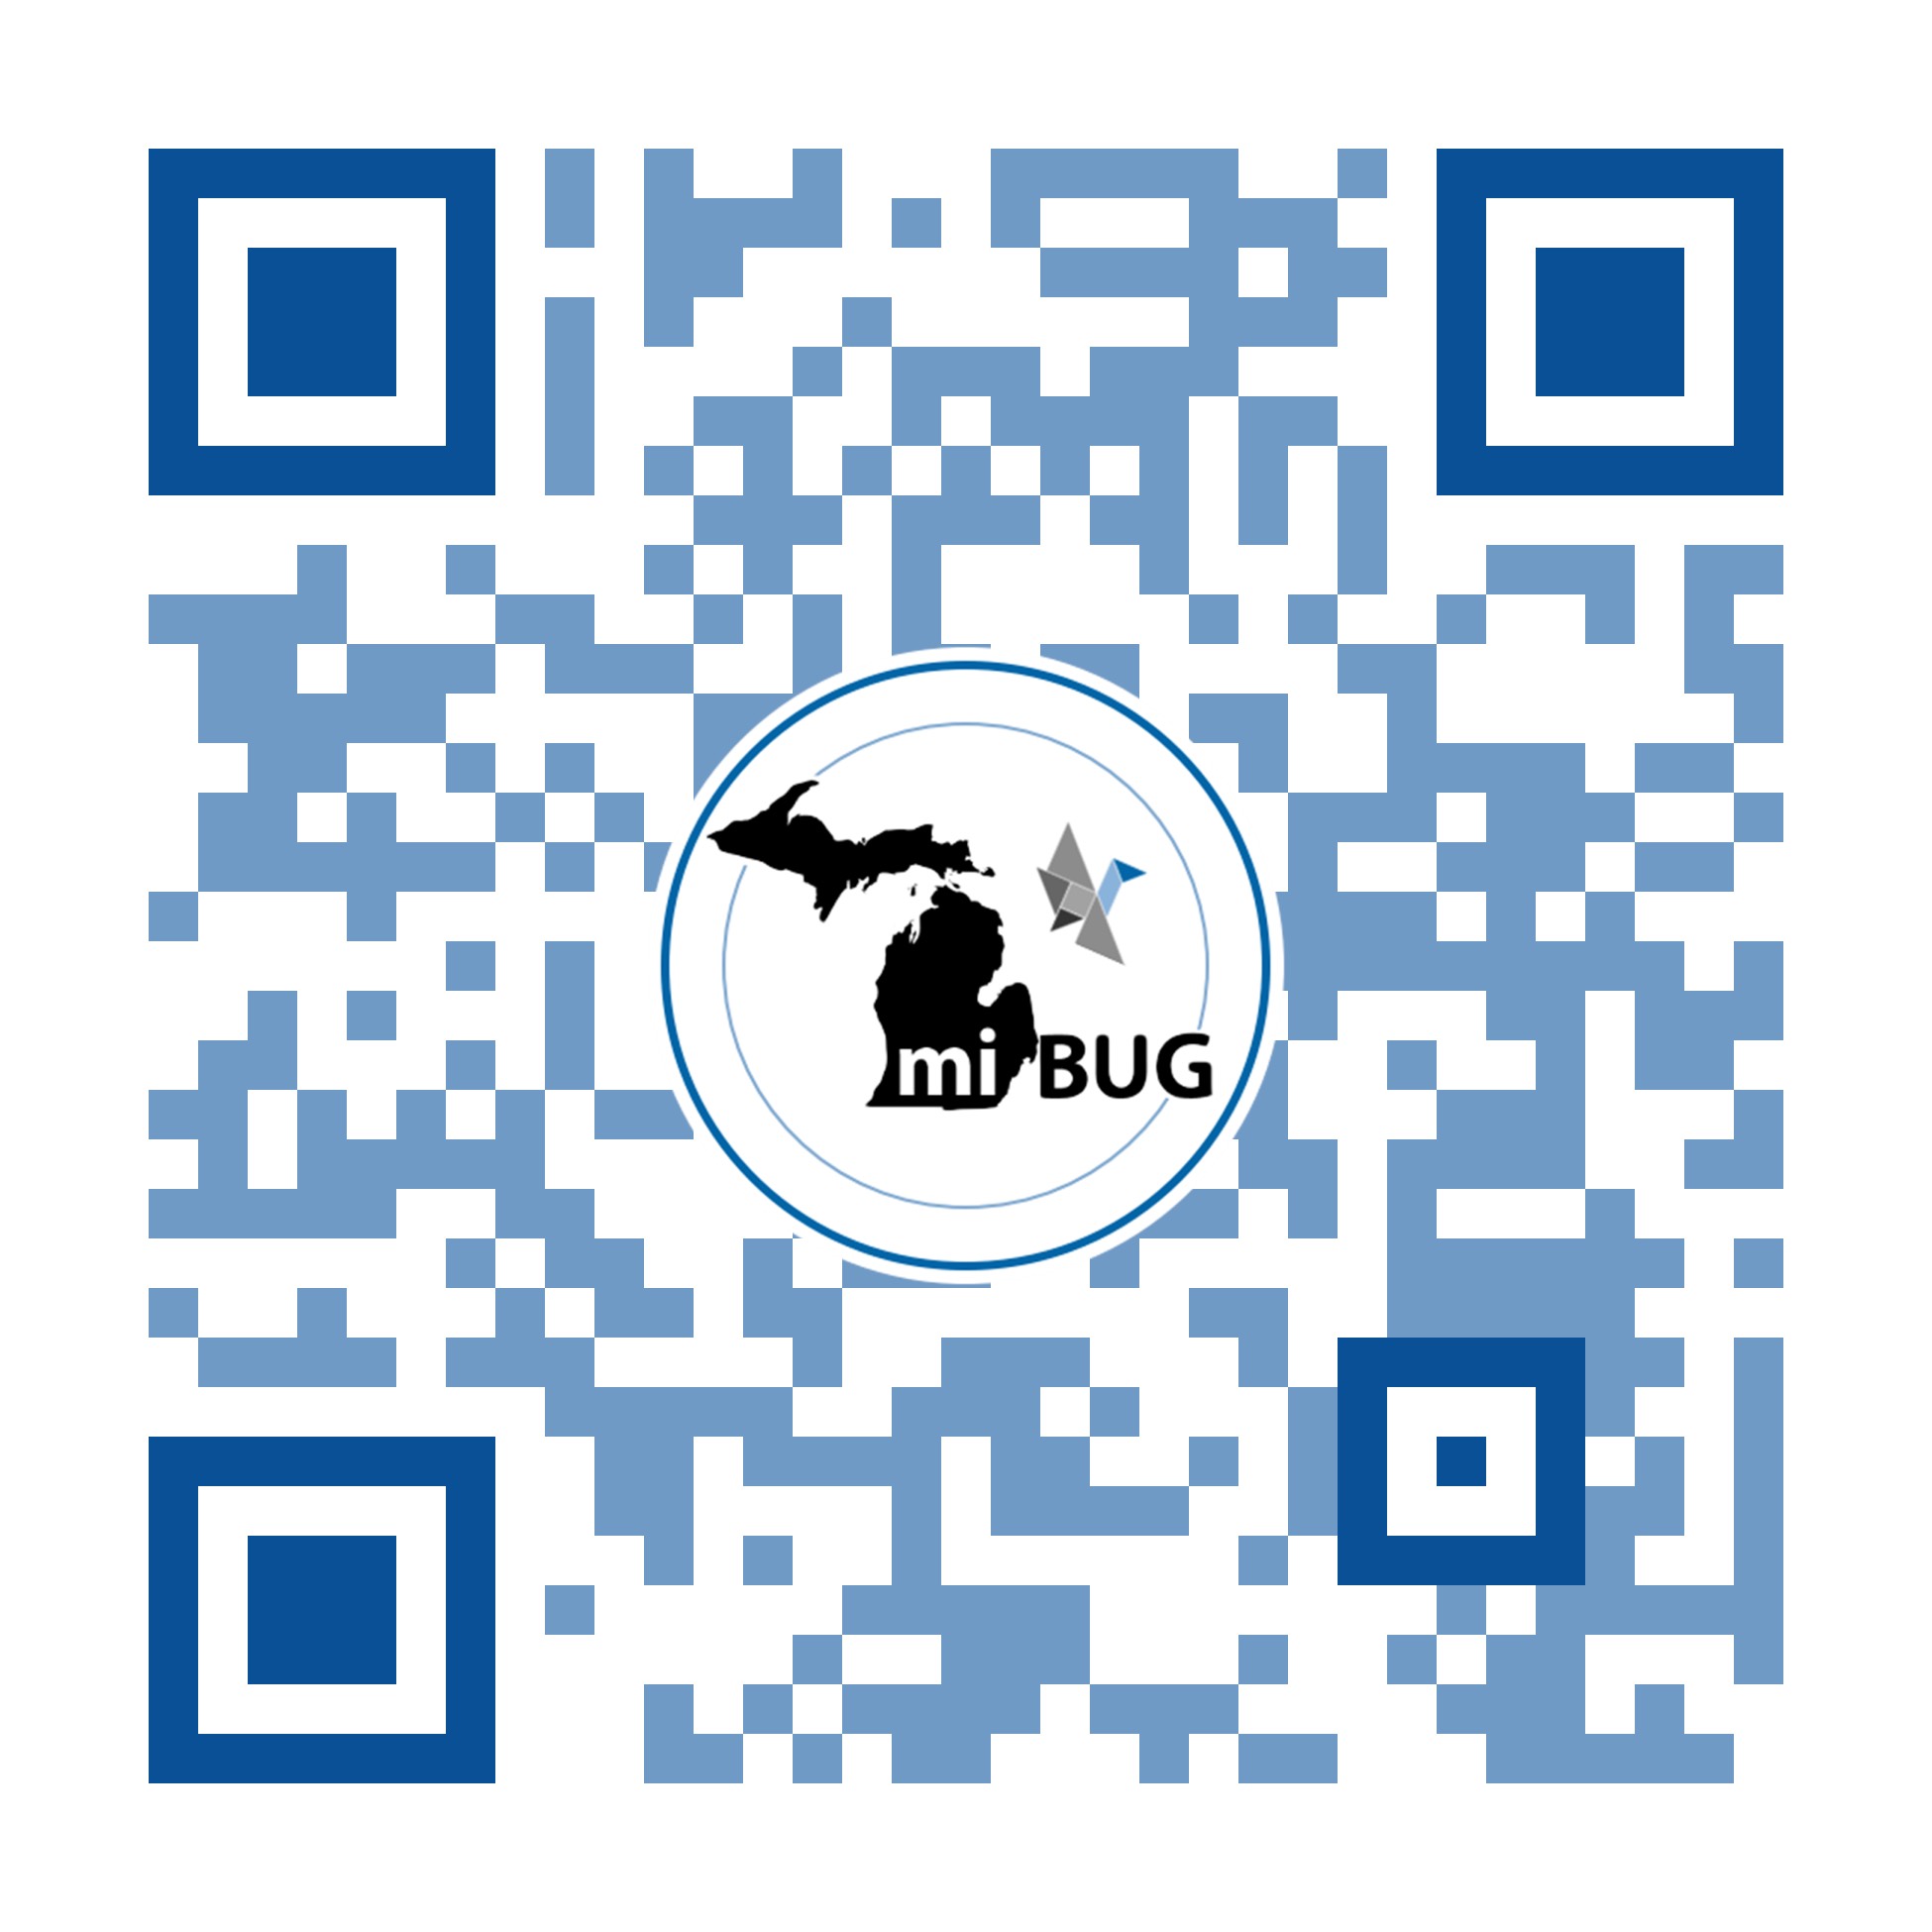 QR code for the miBUG mobile app